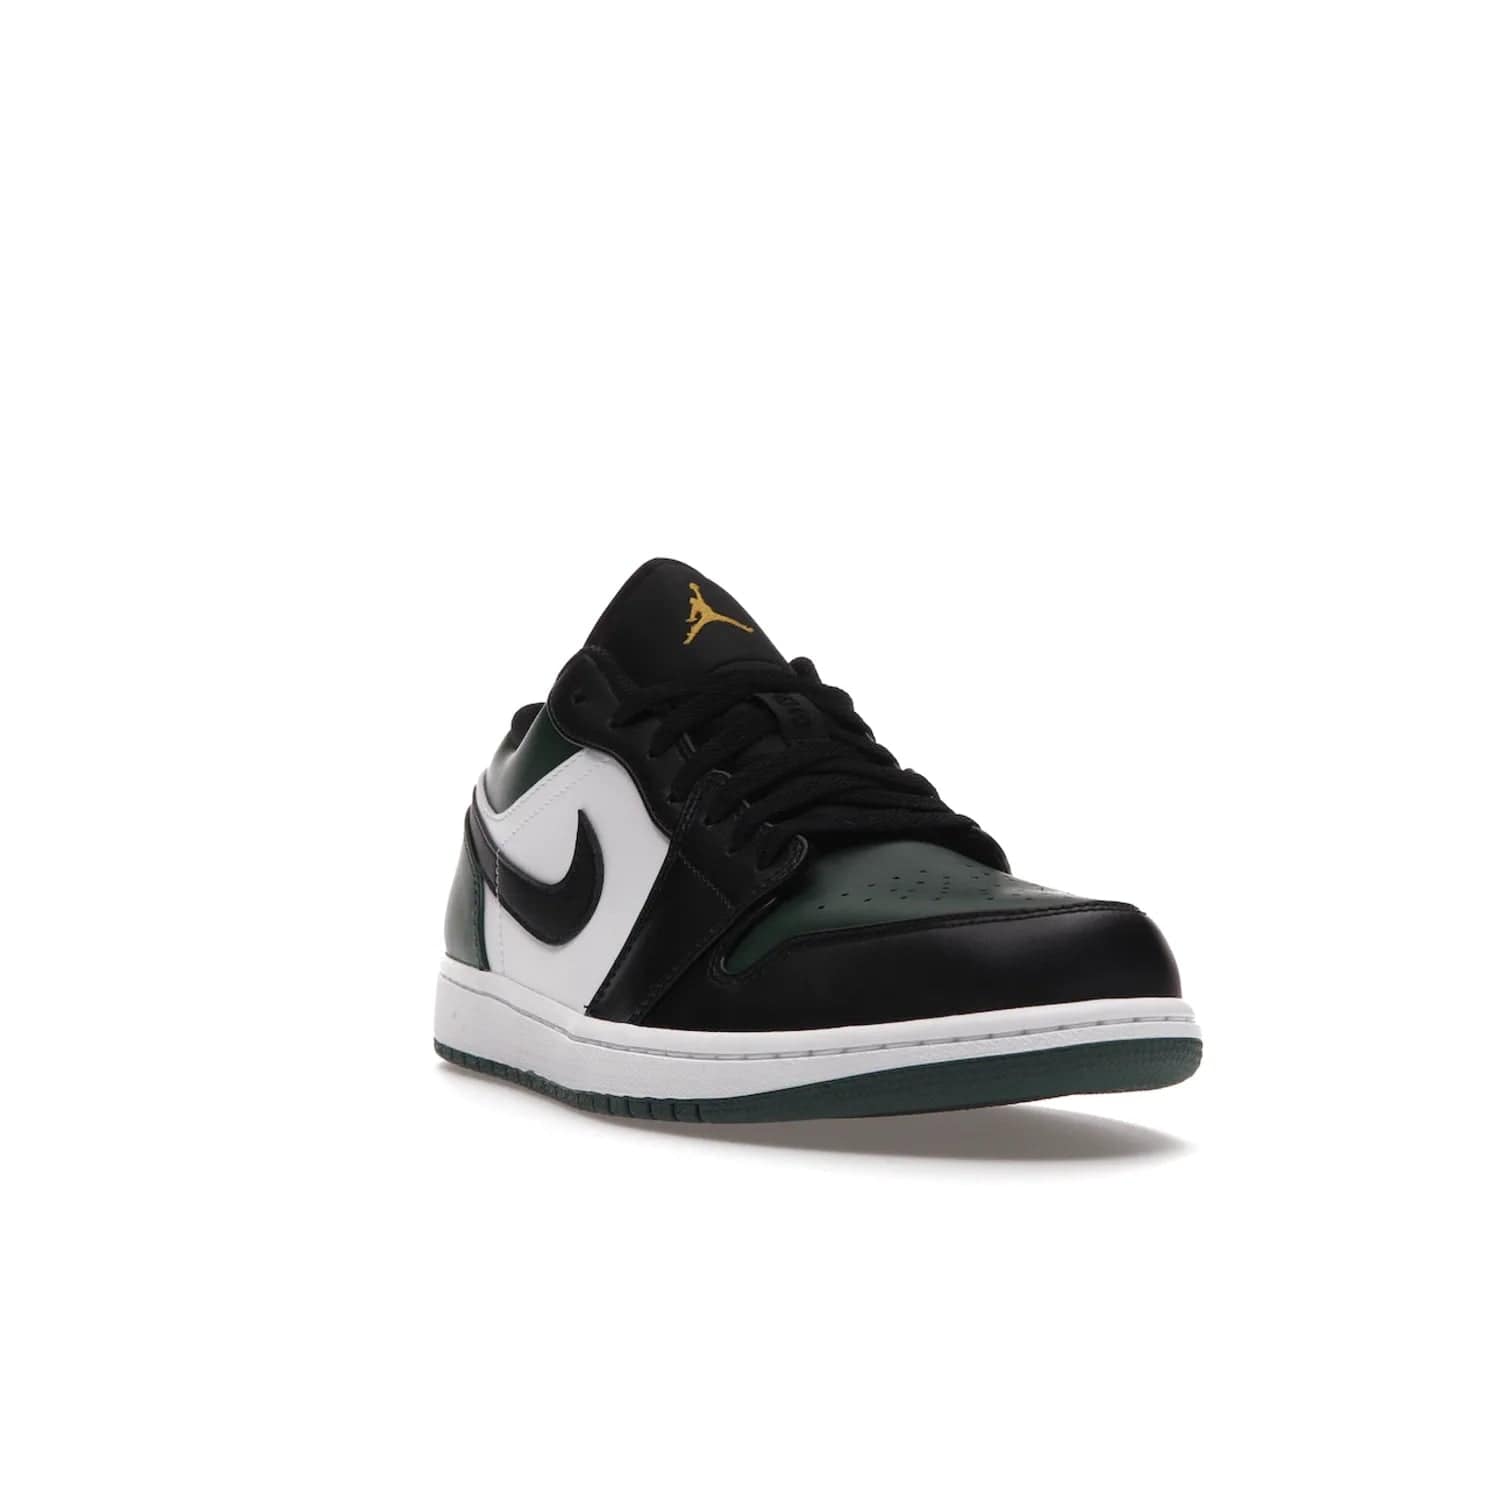 Jordan 1 Low Green Toe - Image 7 - Only at www.BallersClubKickz.com - The Jordan 1 Low Green Toe features white, black and Noble Green leather with black Swoosh. Get the classic Bred Toe-inspired color blocking with green perforated toe box. White and green Air sole completes the design. Released in October 2021 at only $100. Grab your pair now!